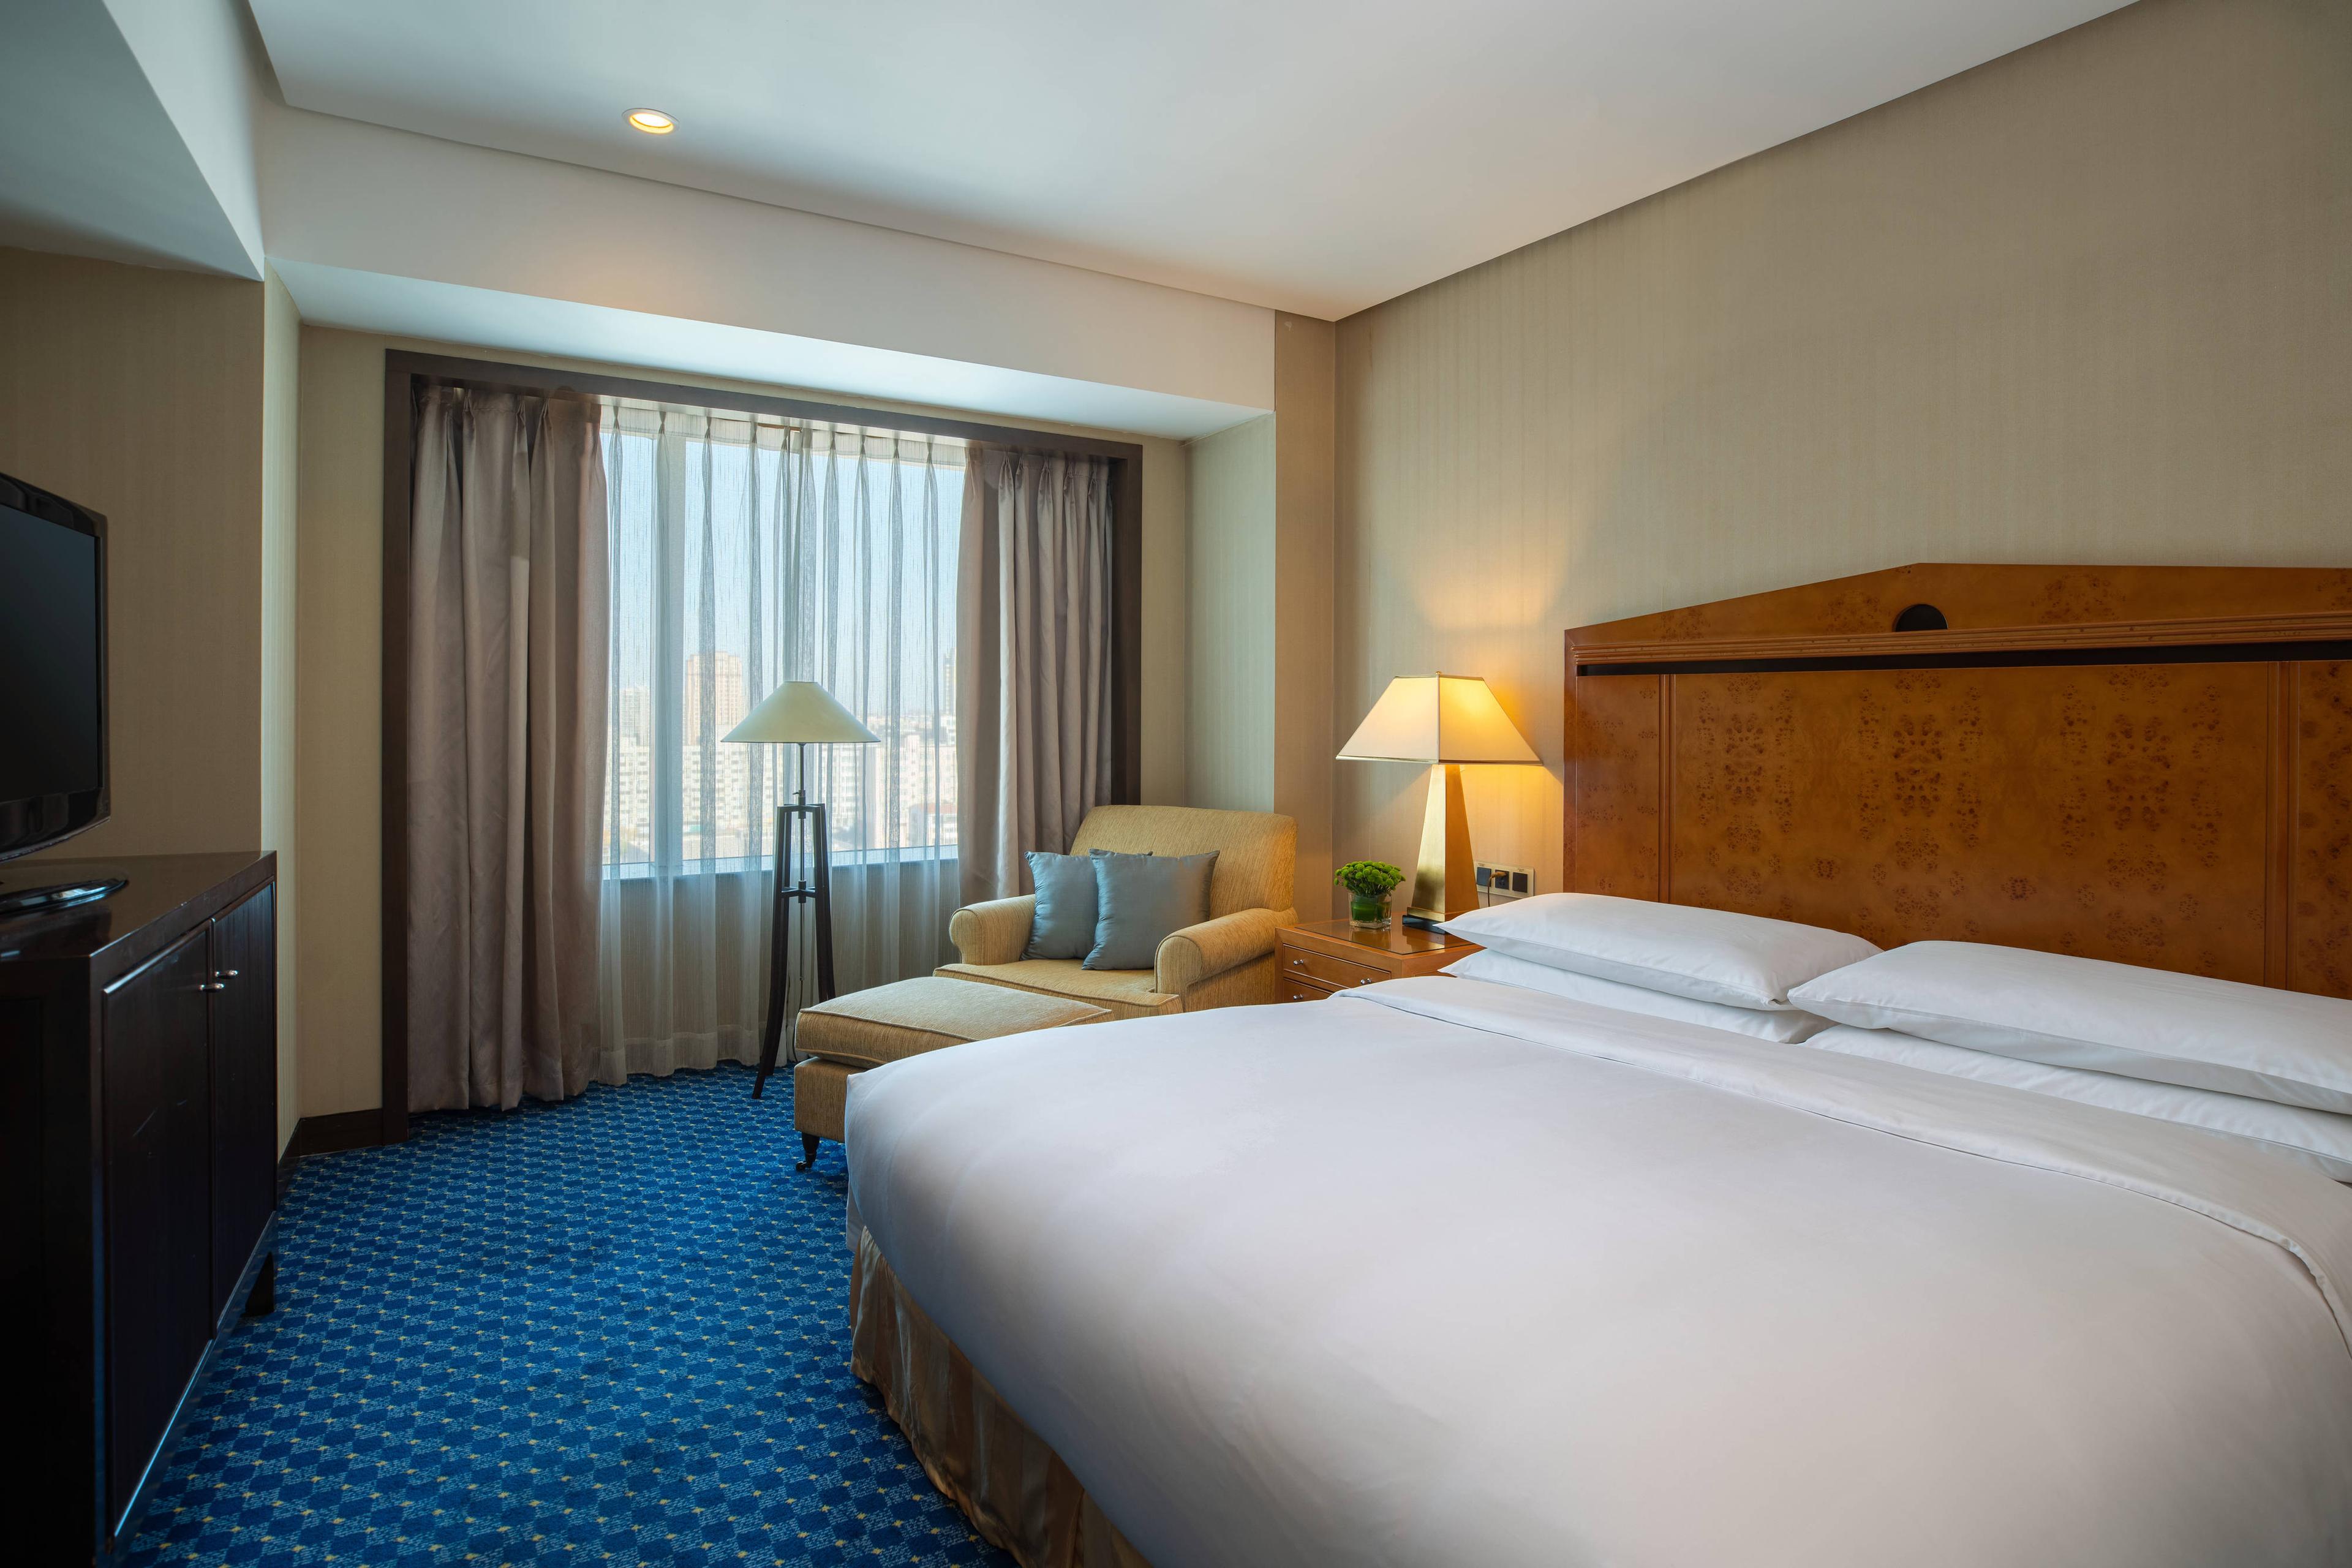 The junior suite room is spacious and comfortable with a king bed, access to high-speed Internet and relaxing shower and bathtub.